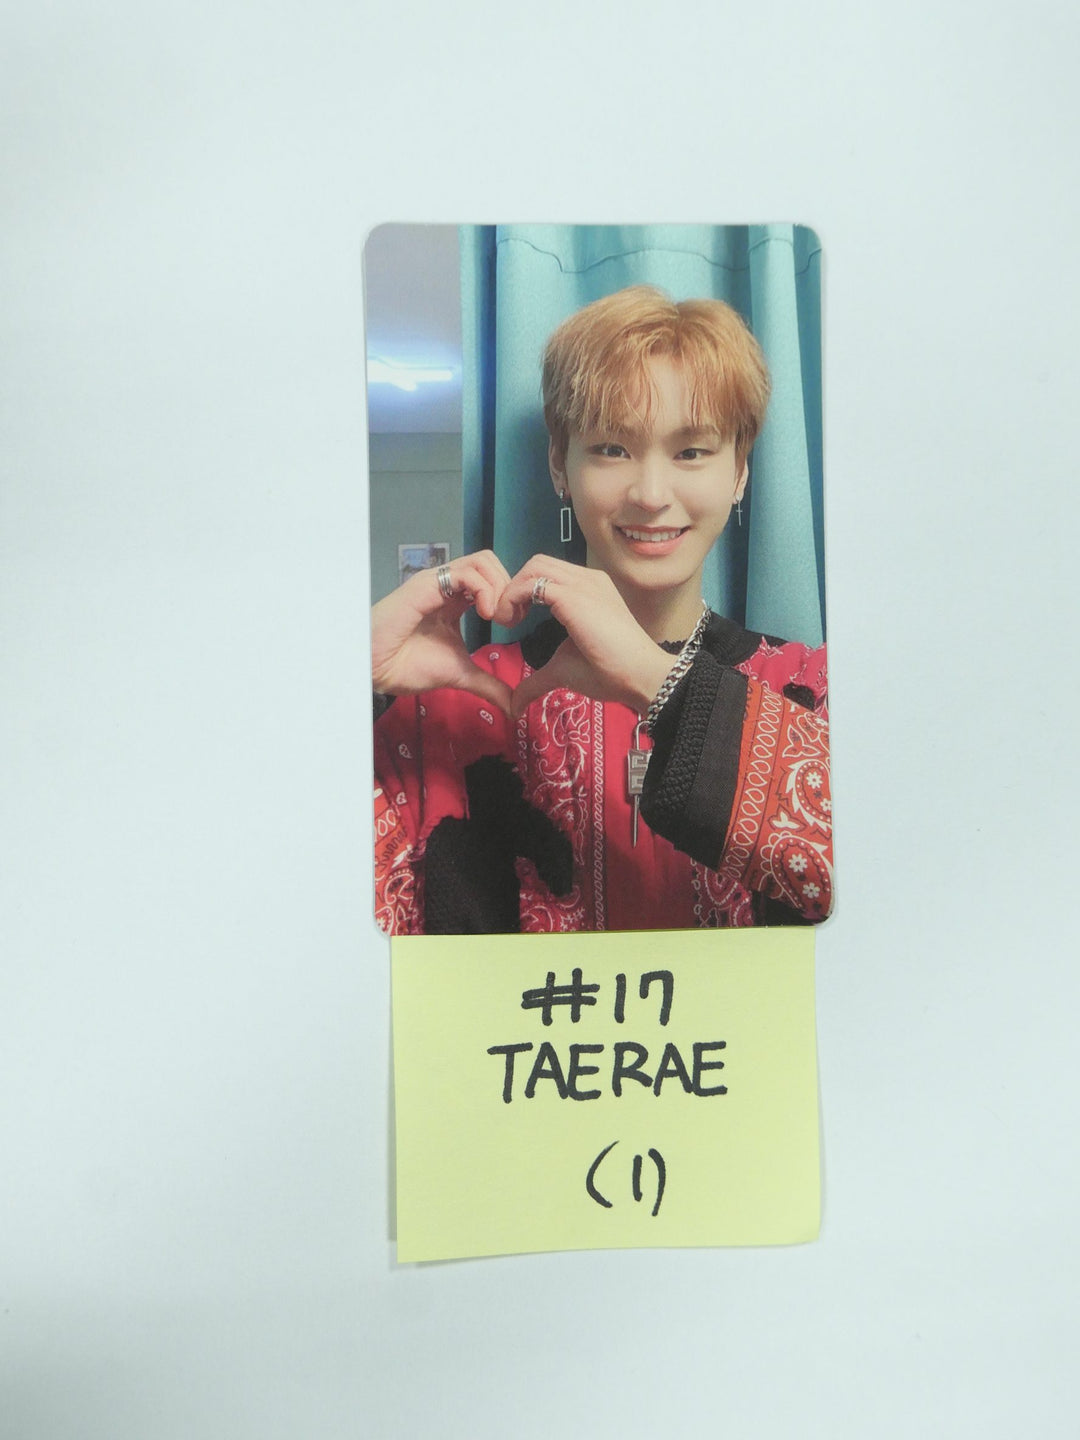 TEMPEST "It's ME" - Official Photocard [LEW, HWARANG, TAERAE]